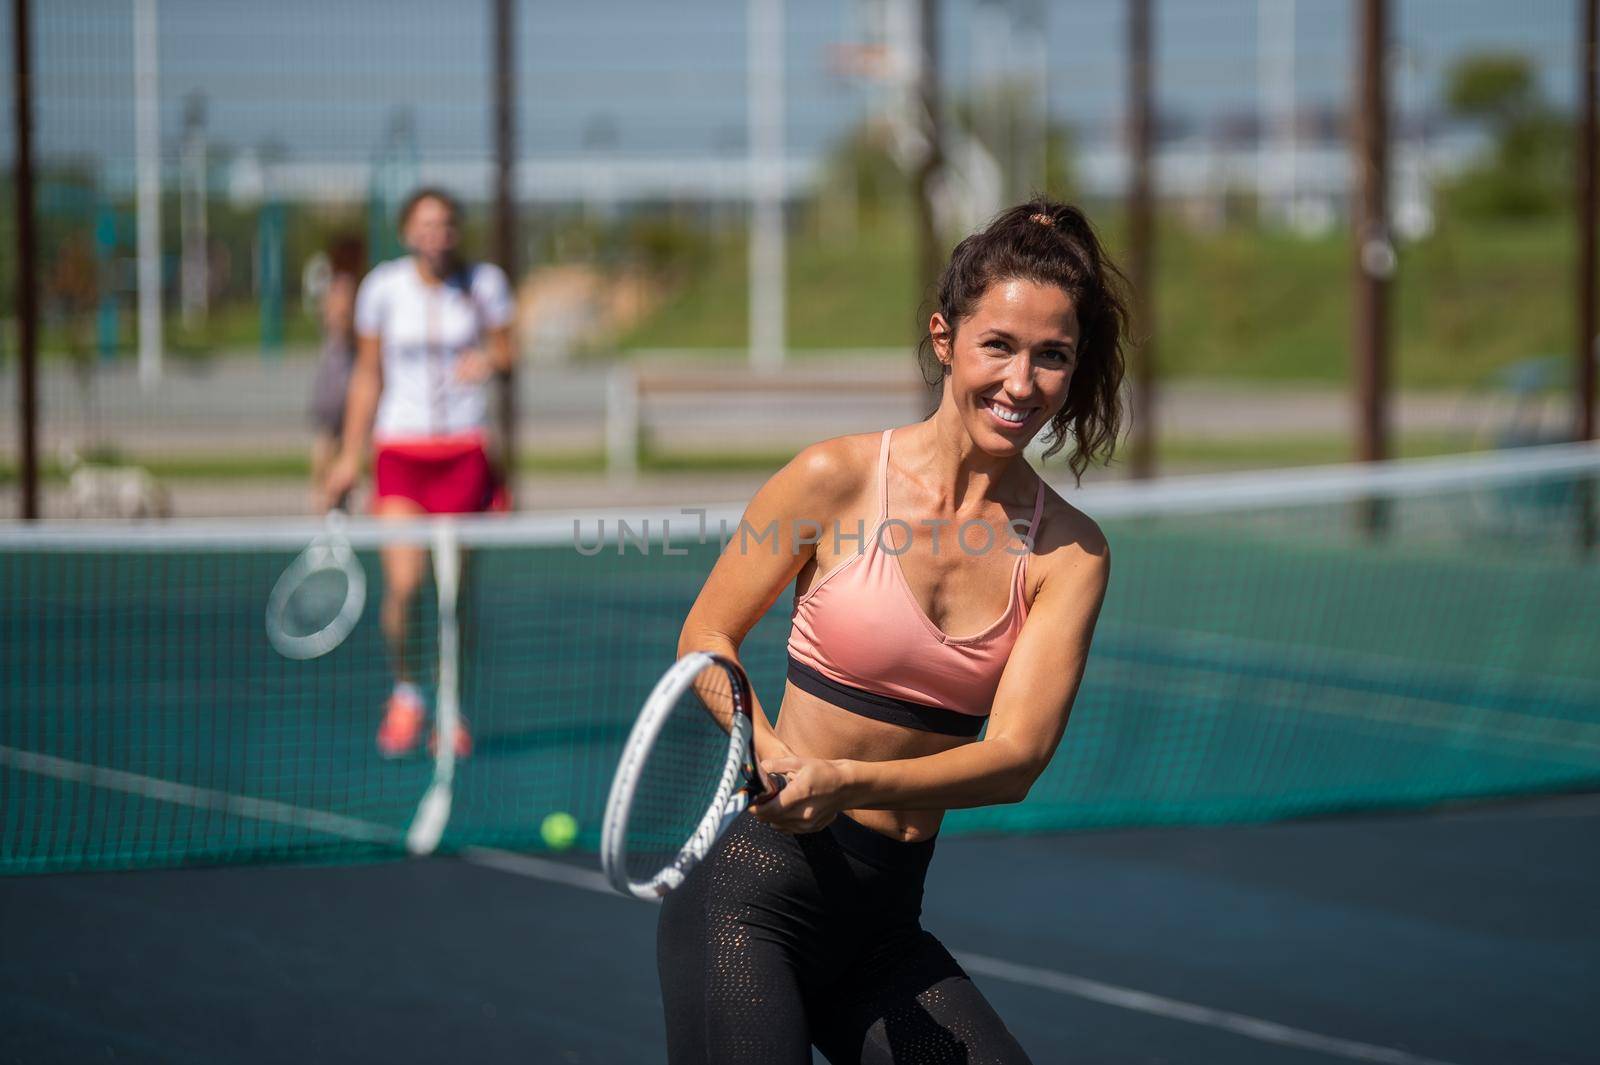 Sportive caucasian woman posing with a racket on a tennis court outdoors. by mrwed54